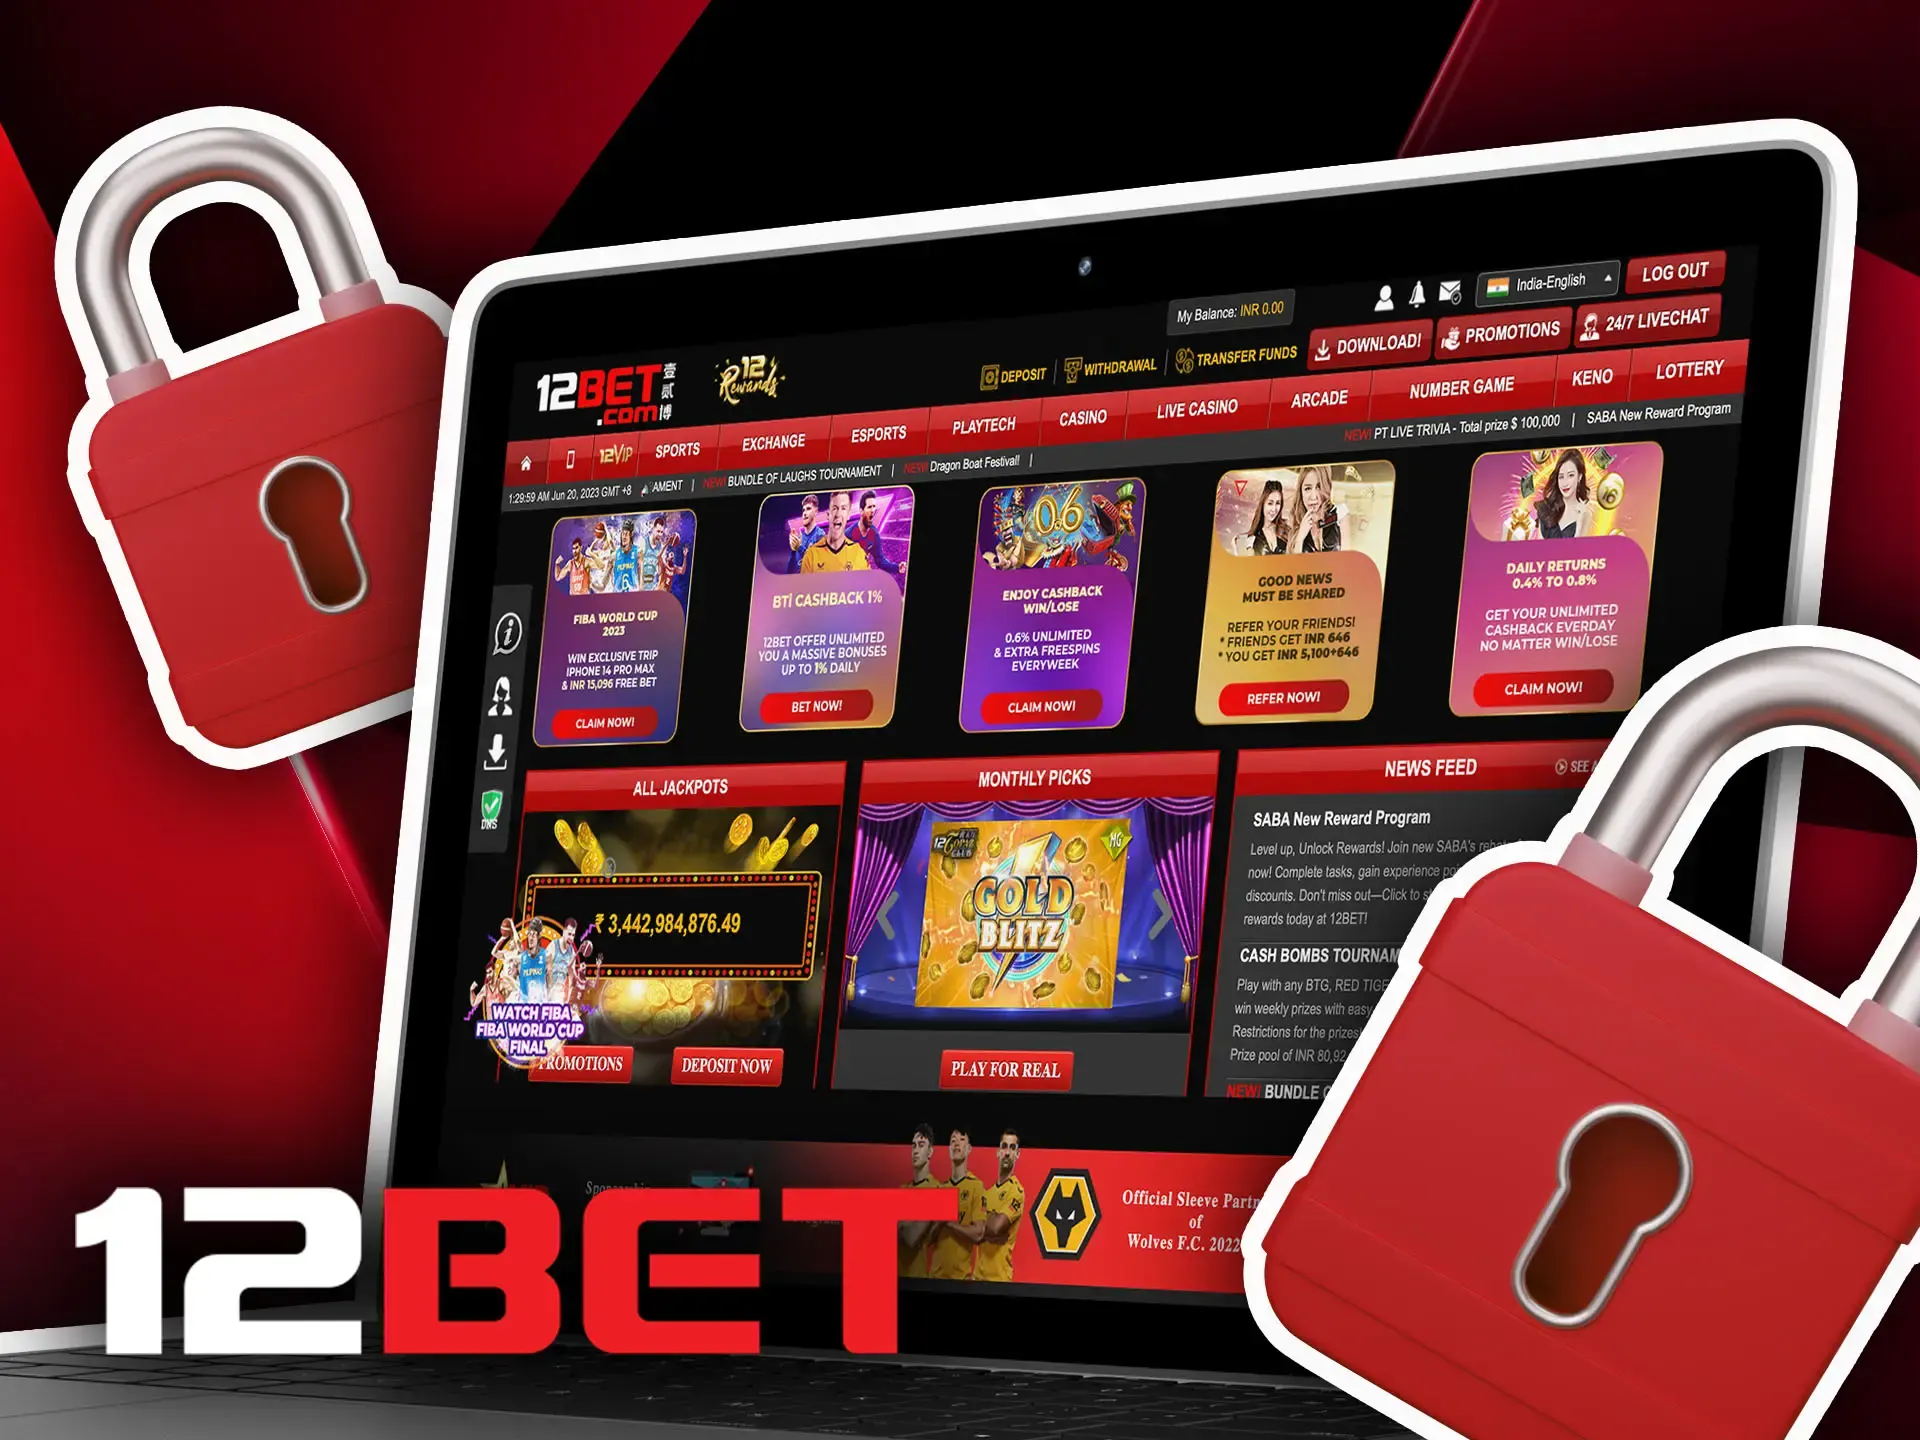 12bet secures all of the private data.